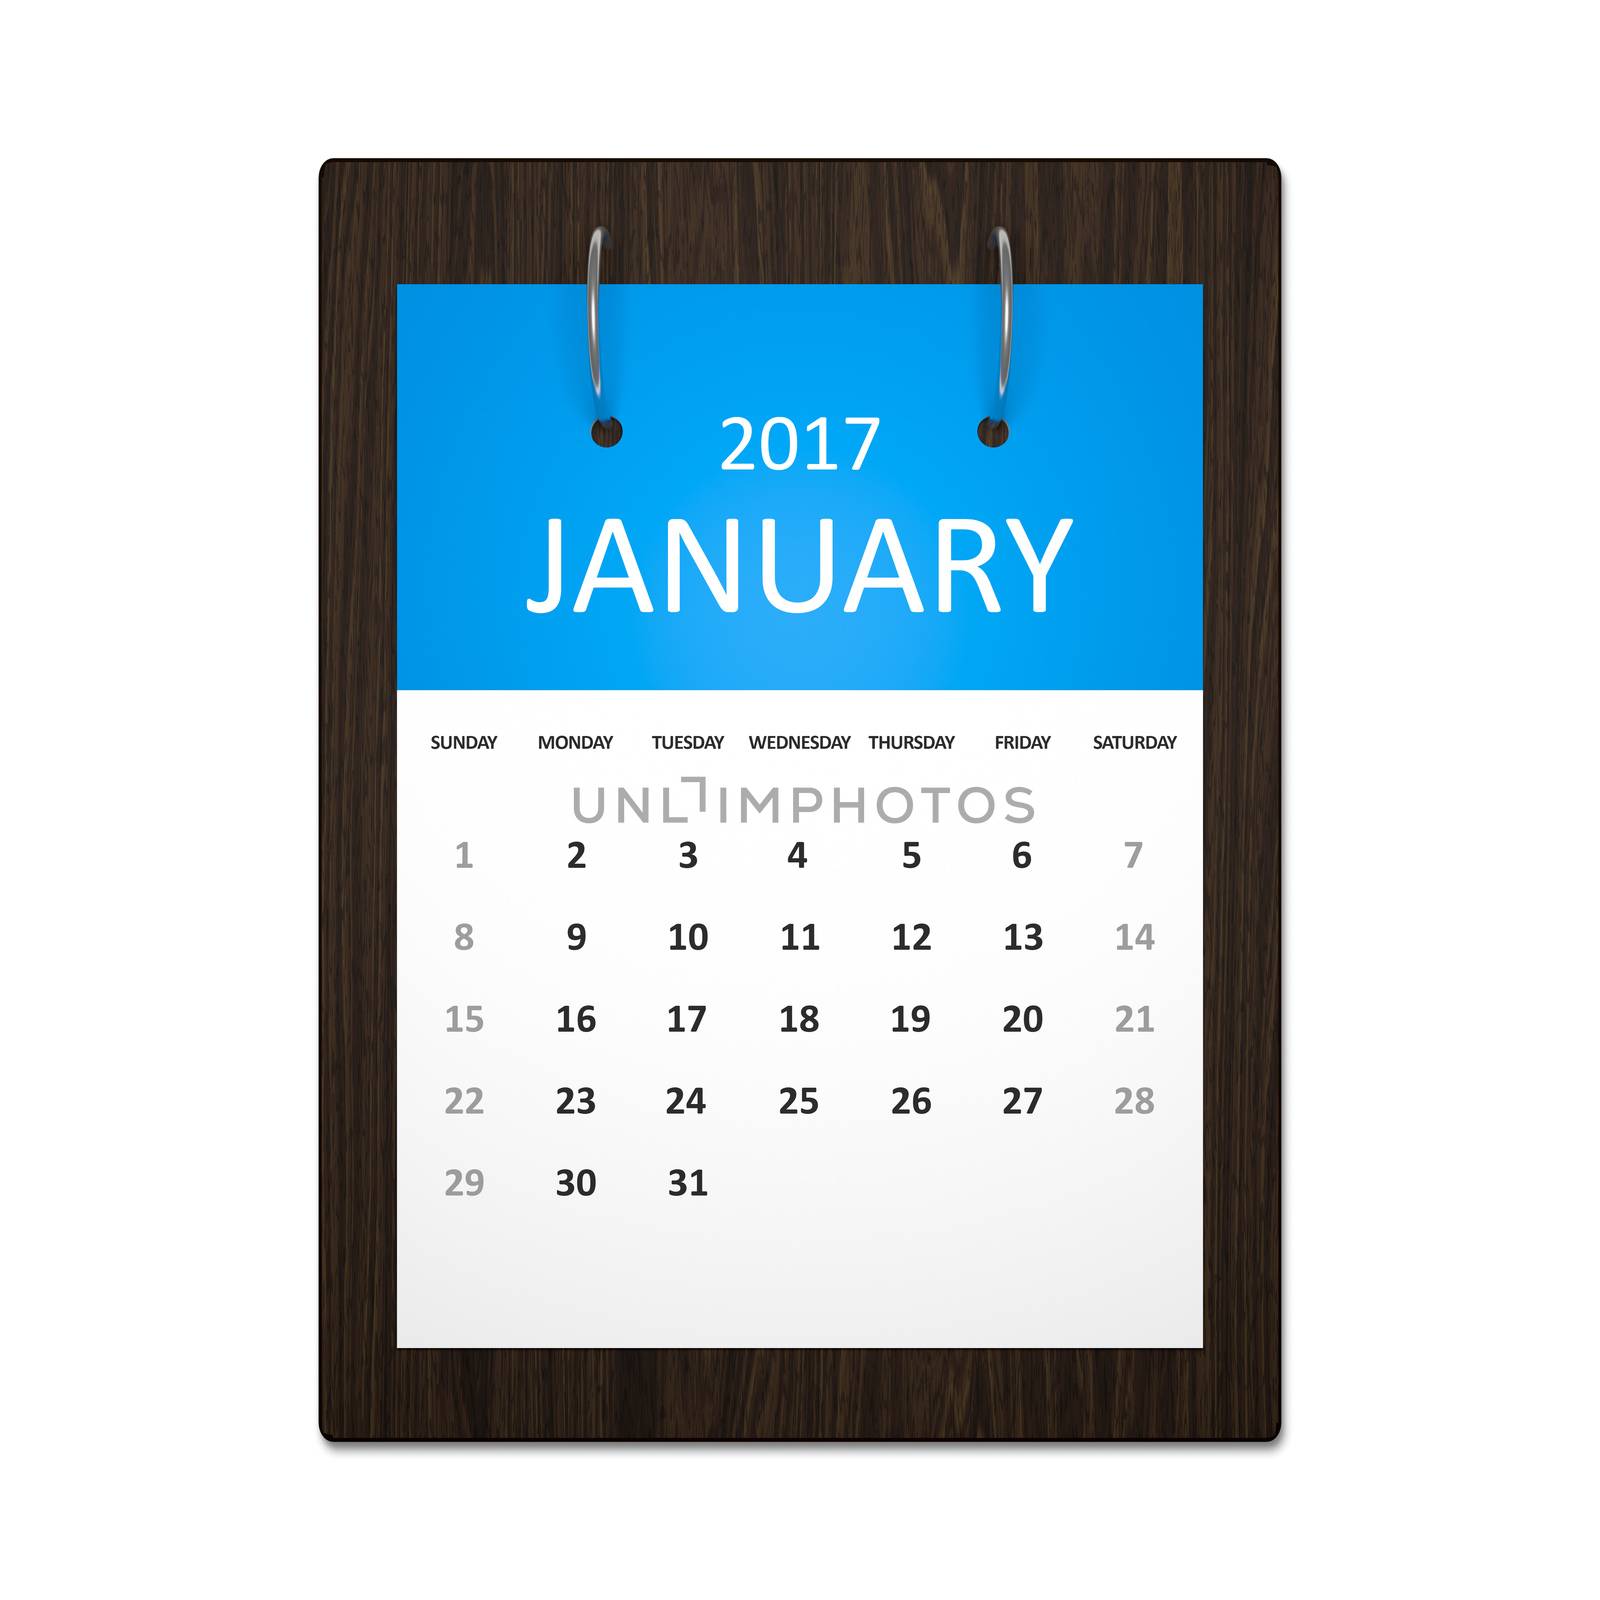 An image of a stylish calendar for event planning 2017 january